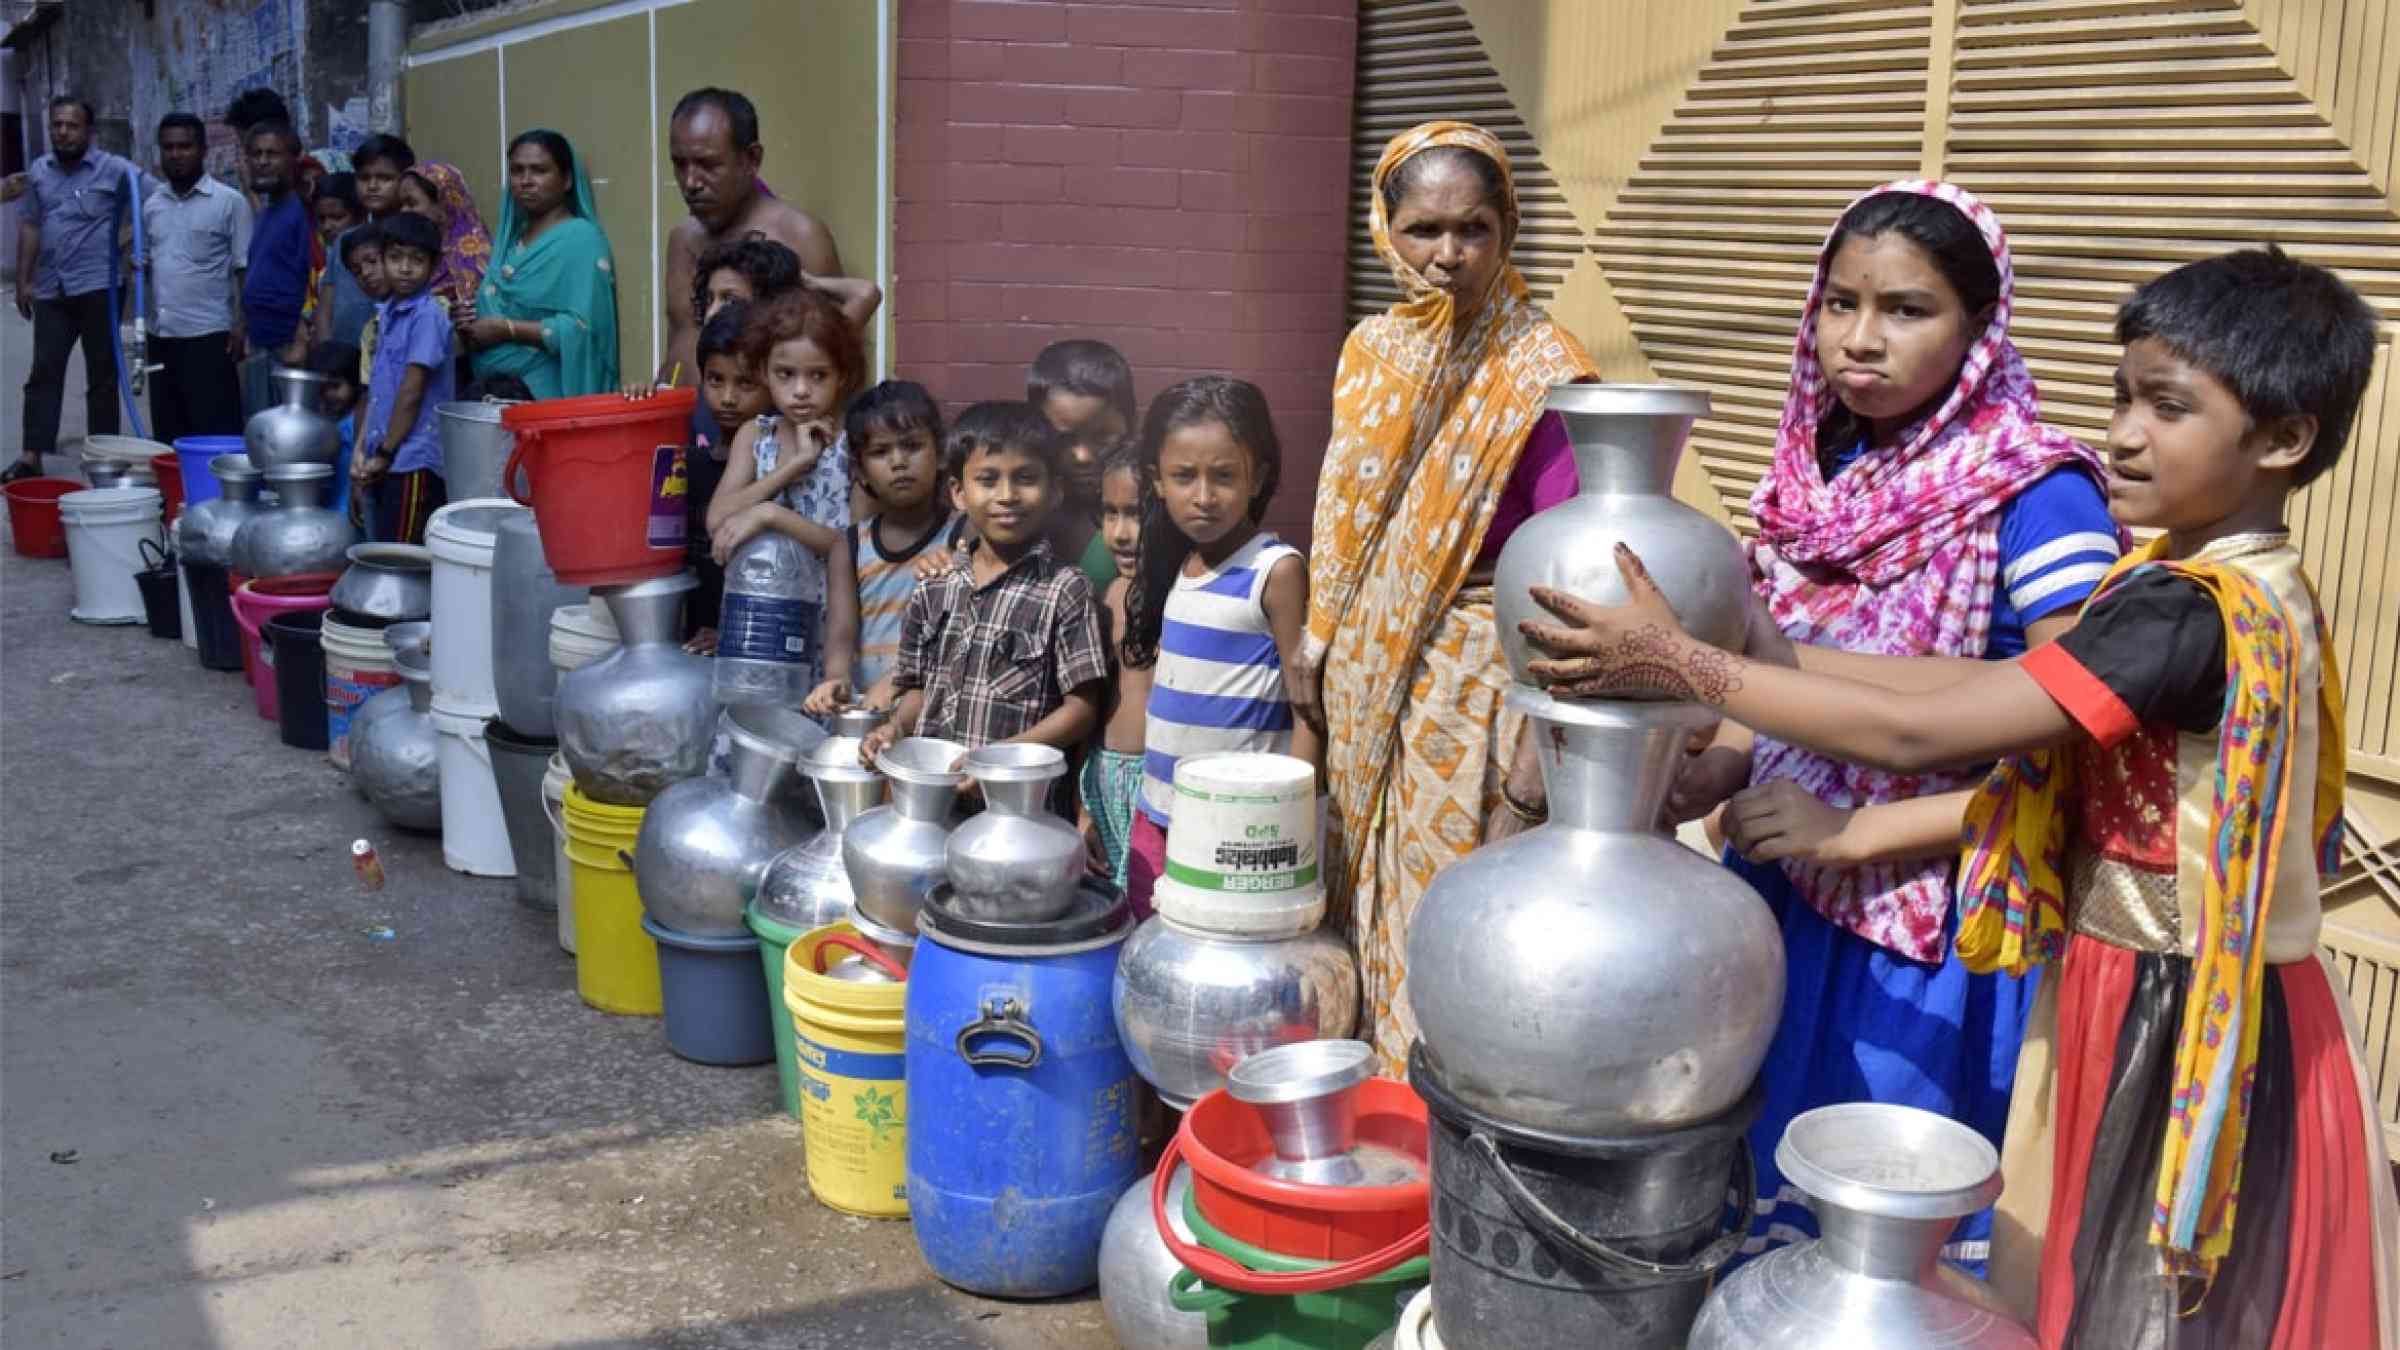 Residents of Dhaka, Bangladesh, wait to collect water from a water supply (2017)